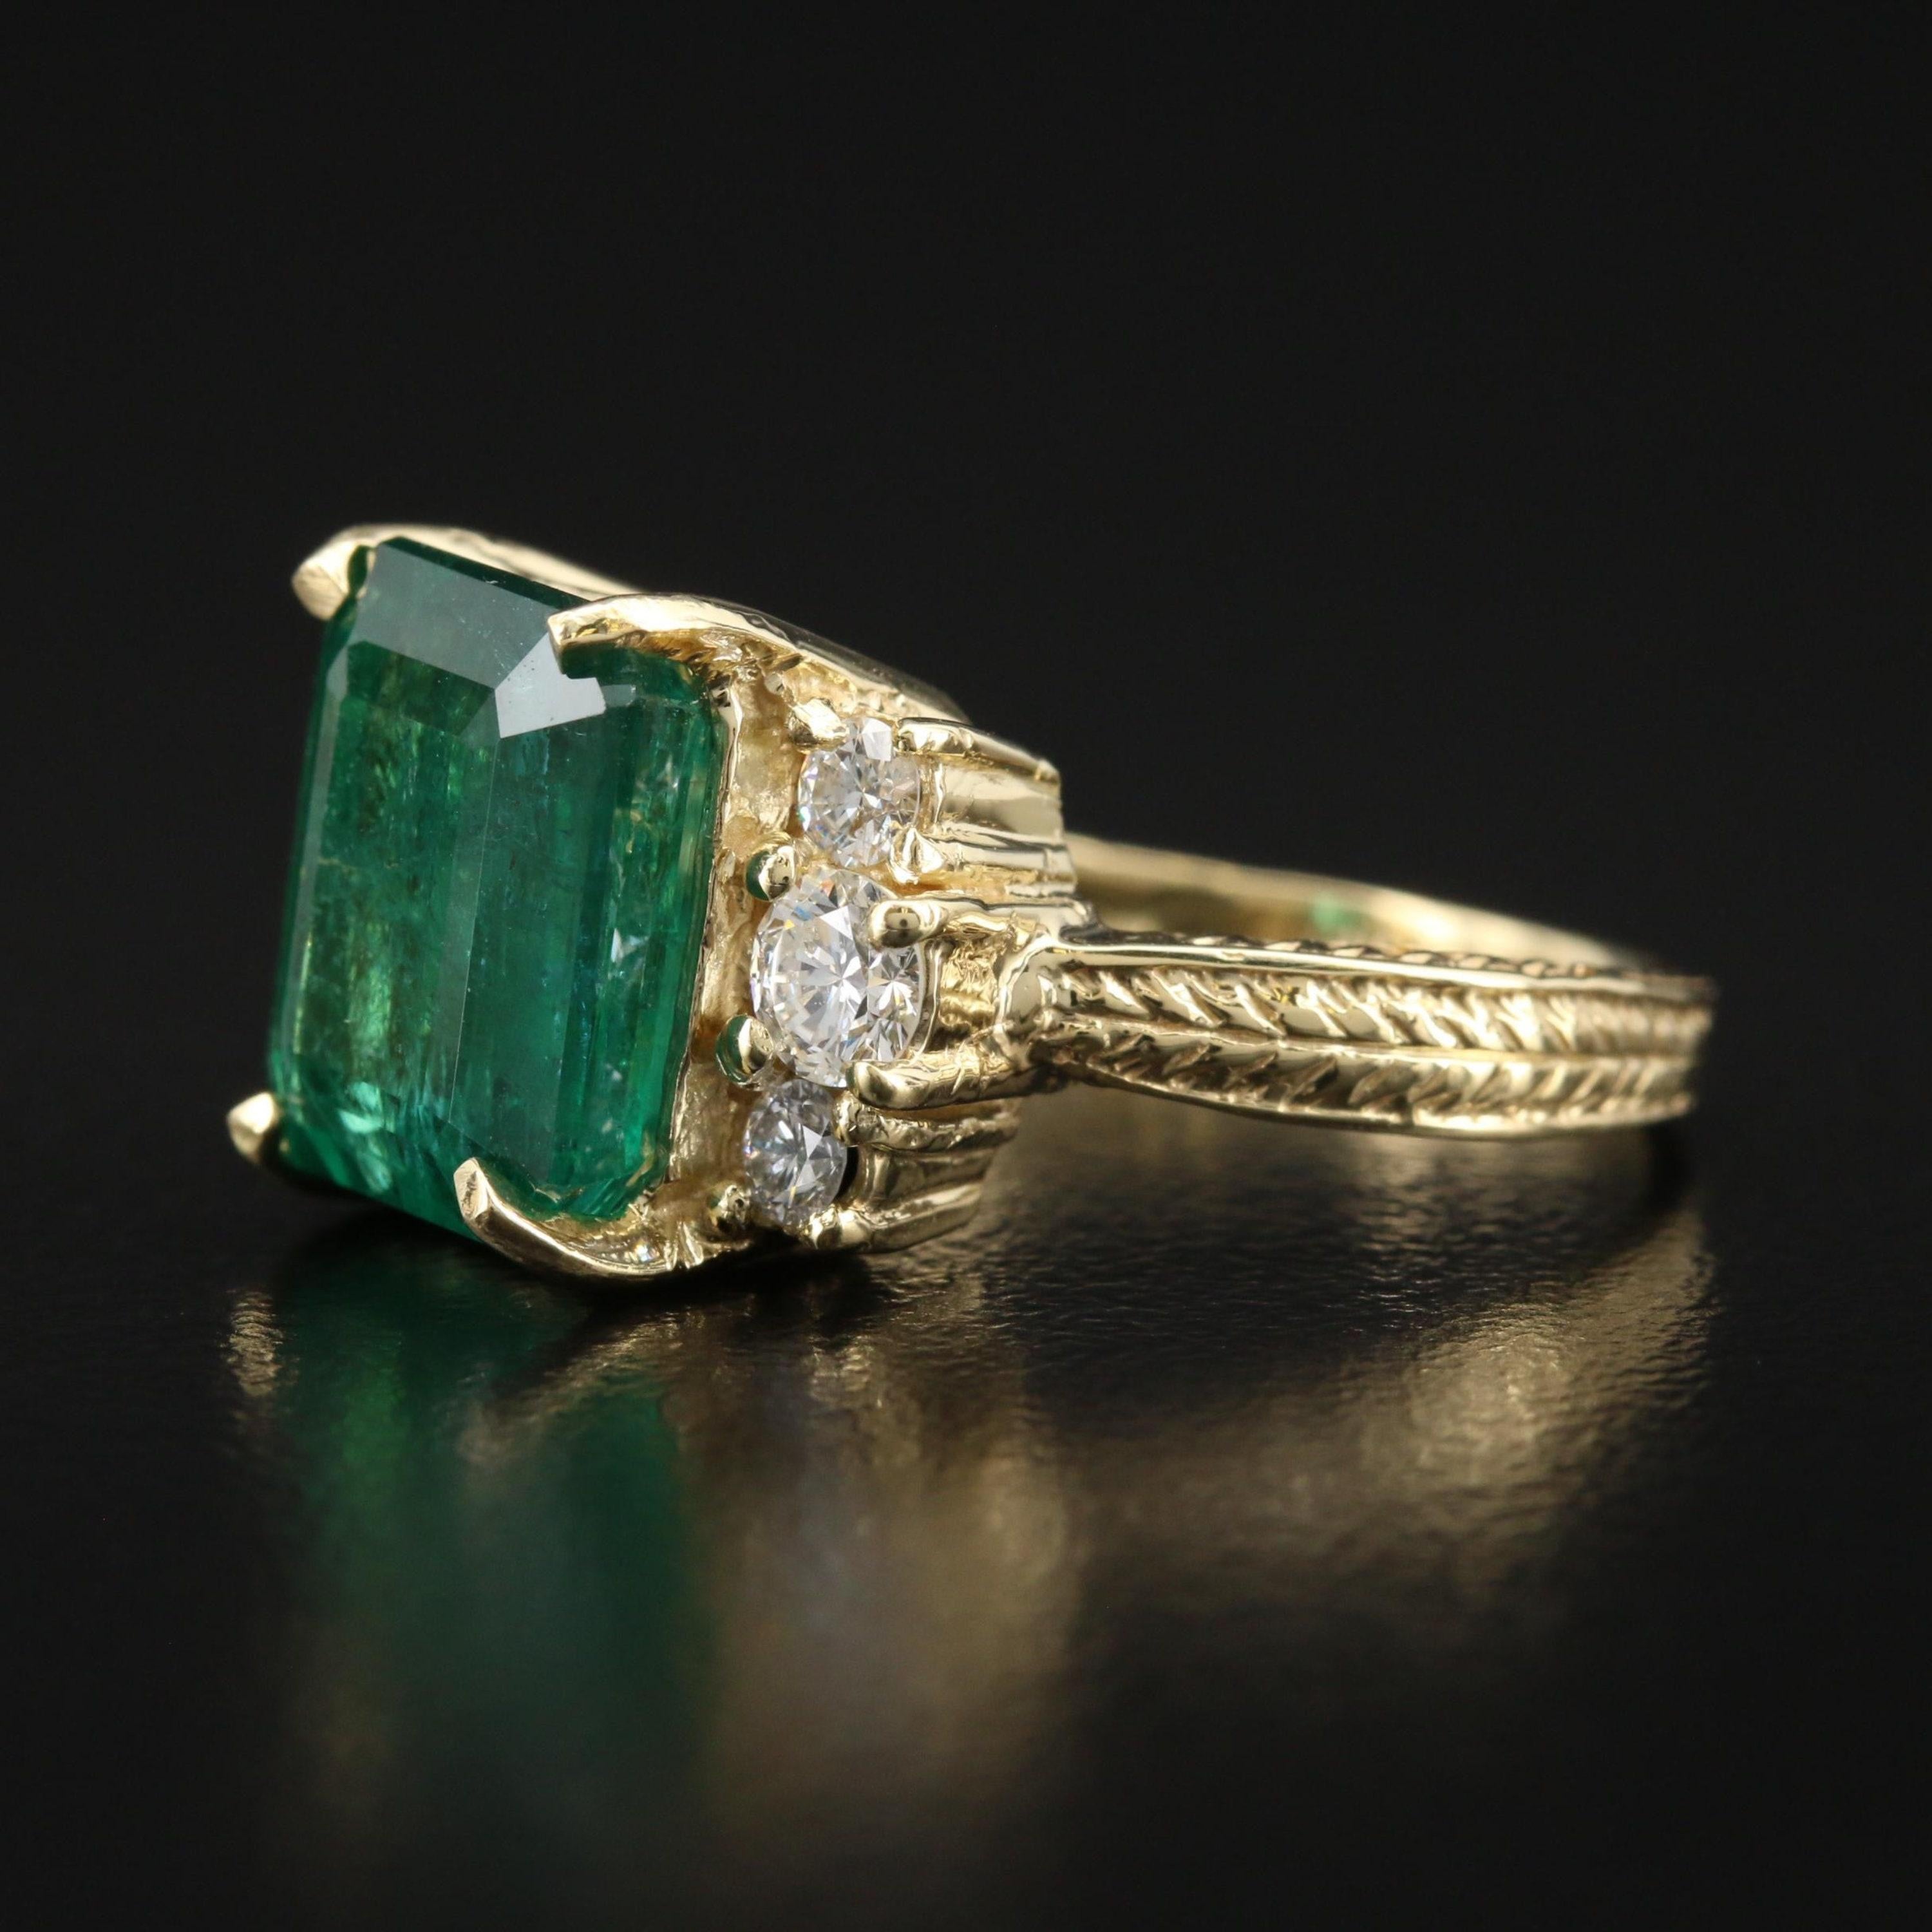 Art Deco 4 CT Certified Natural Emerald and Diamond Engagement Ring in 18K Gold

A stunning ring featuring IGI/GIA Certified 4.01 Carat Natural Emerald and 0.56 Carat of Diamond Accents set in 18K Solid Gold.

Emeralds are highly valued for their